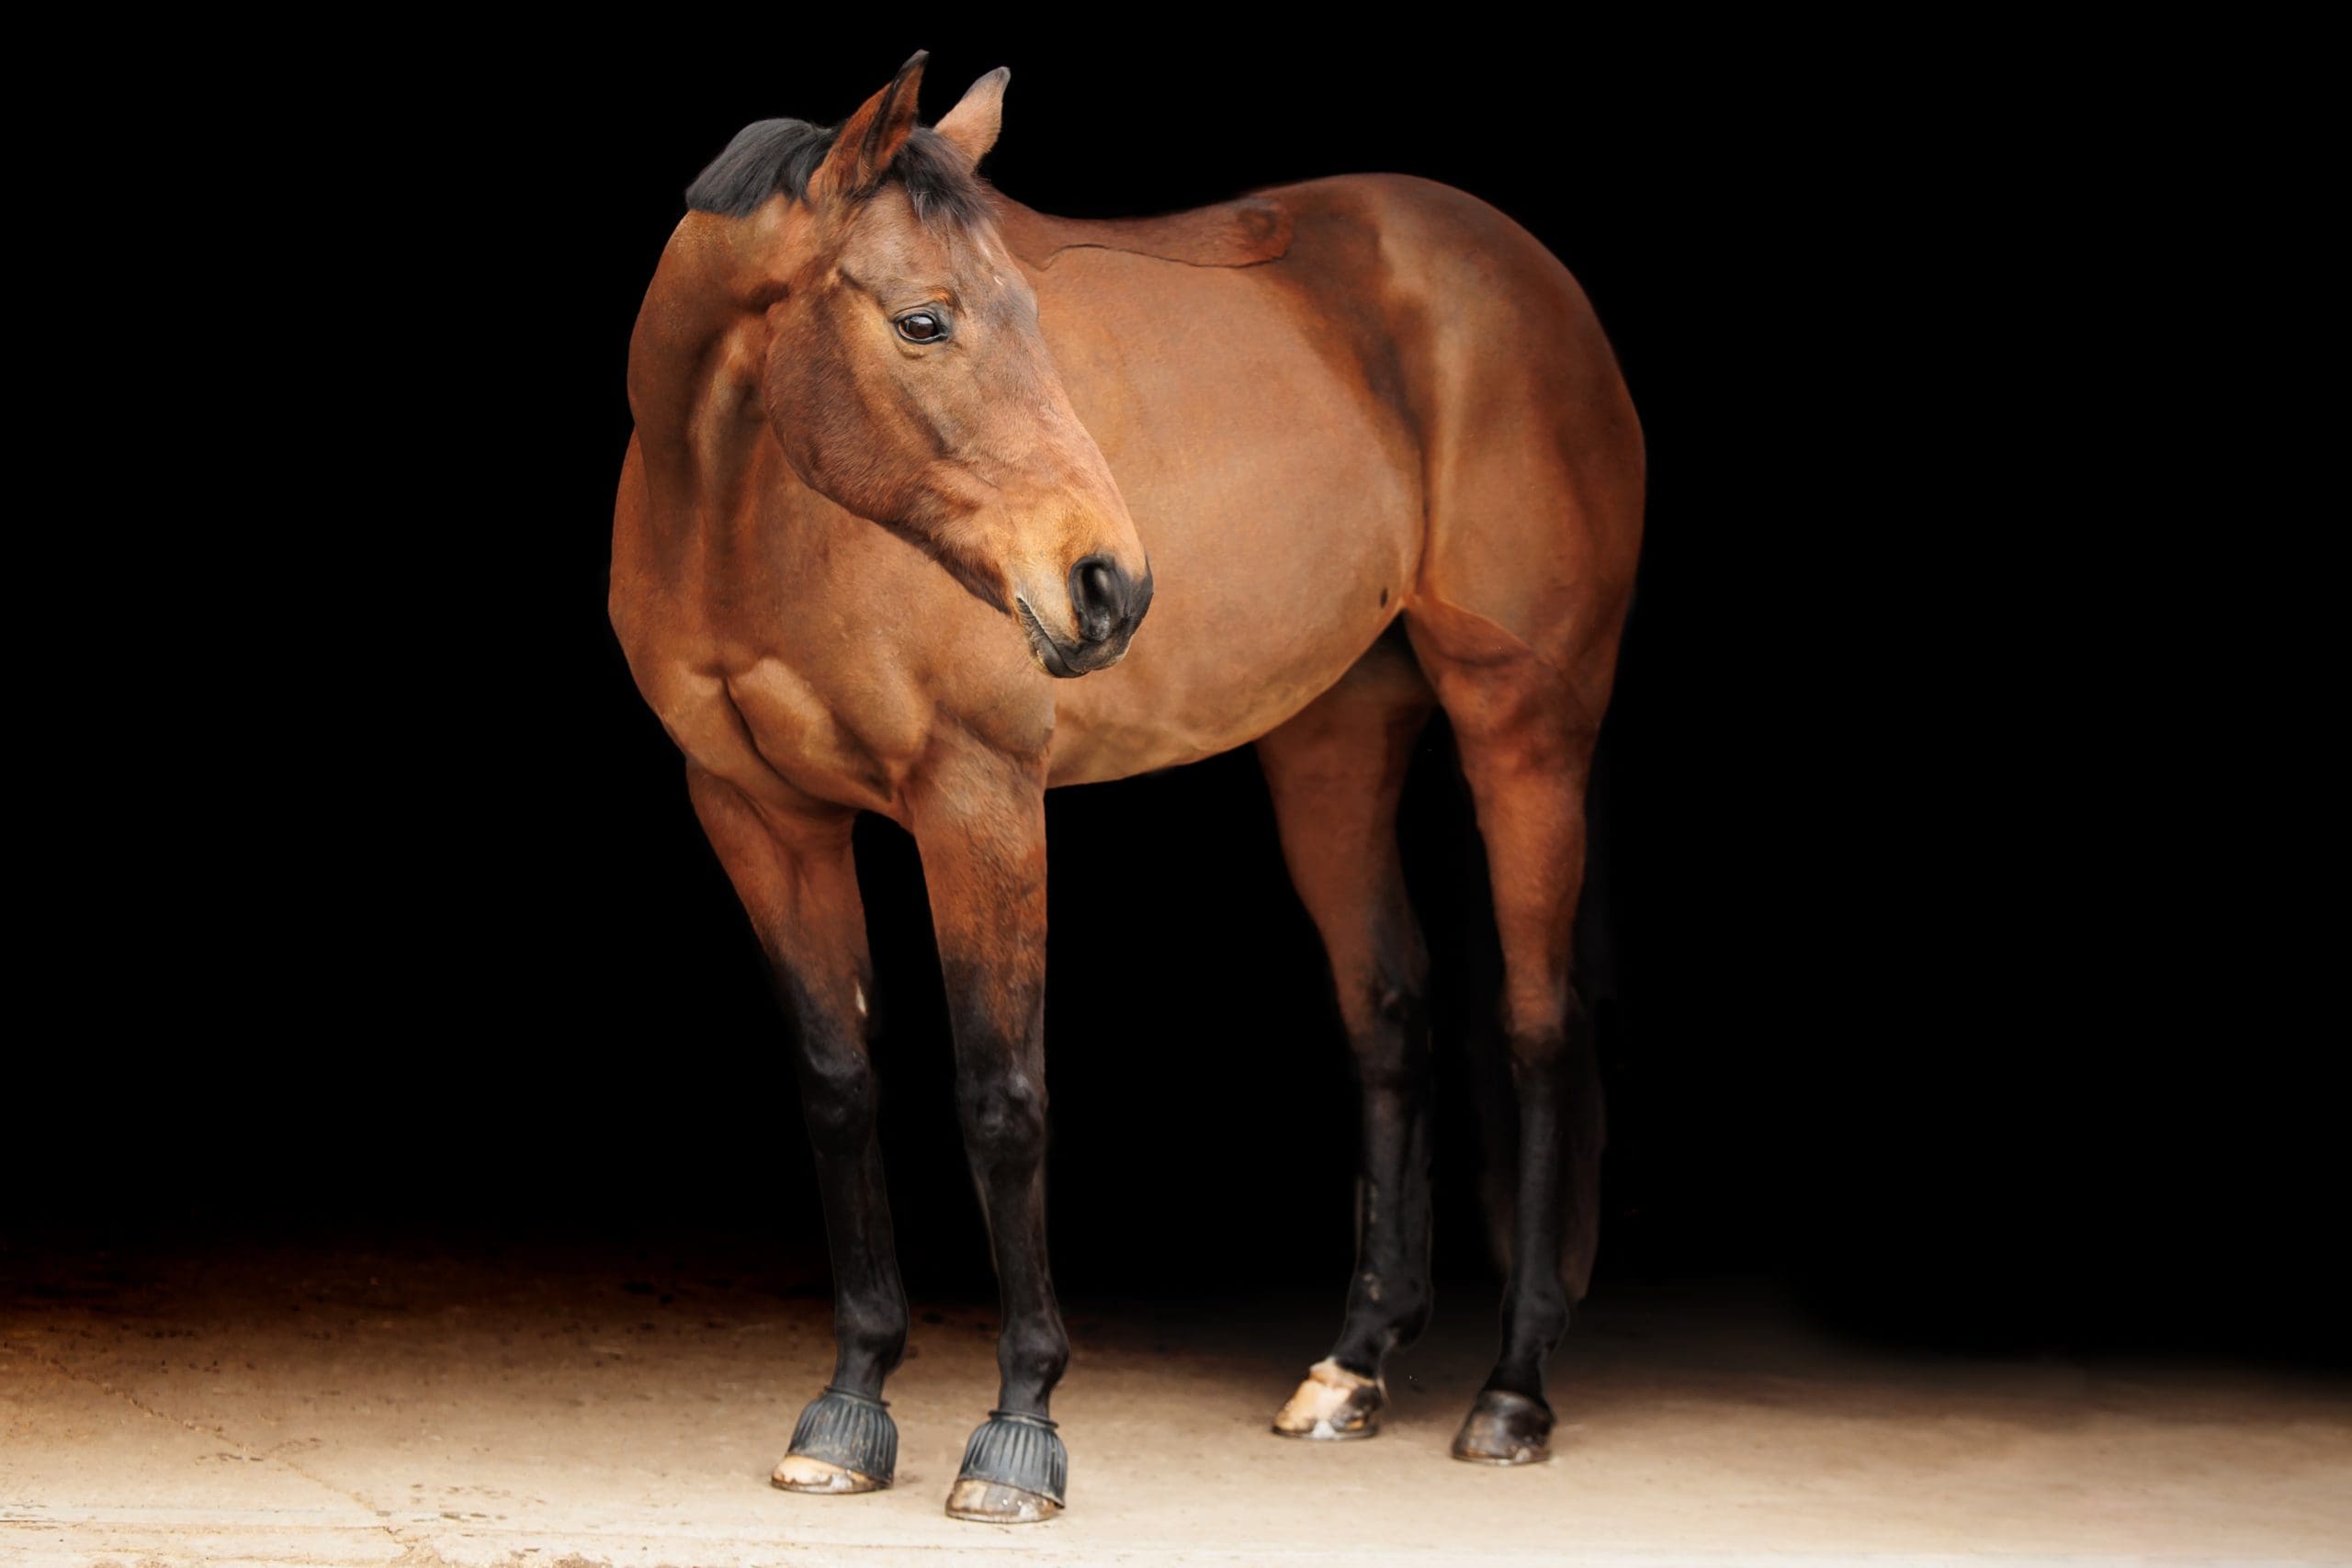 Full body portrait of horse with black background